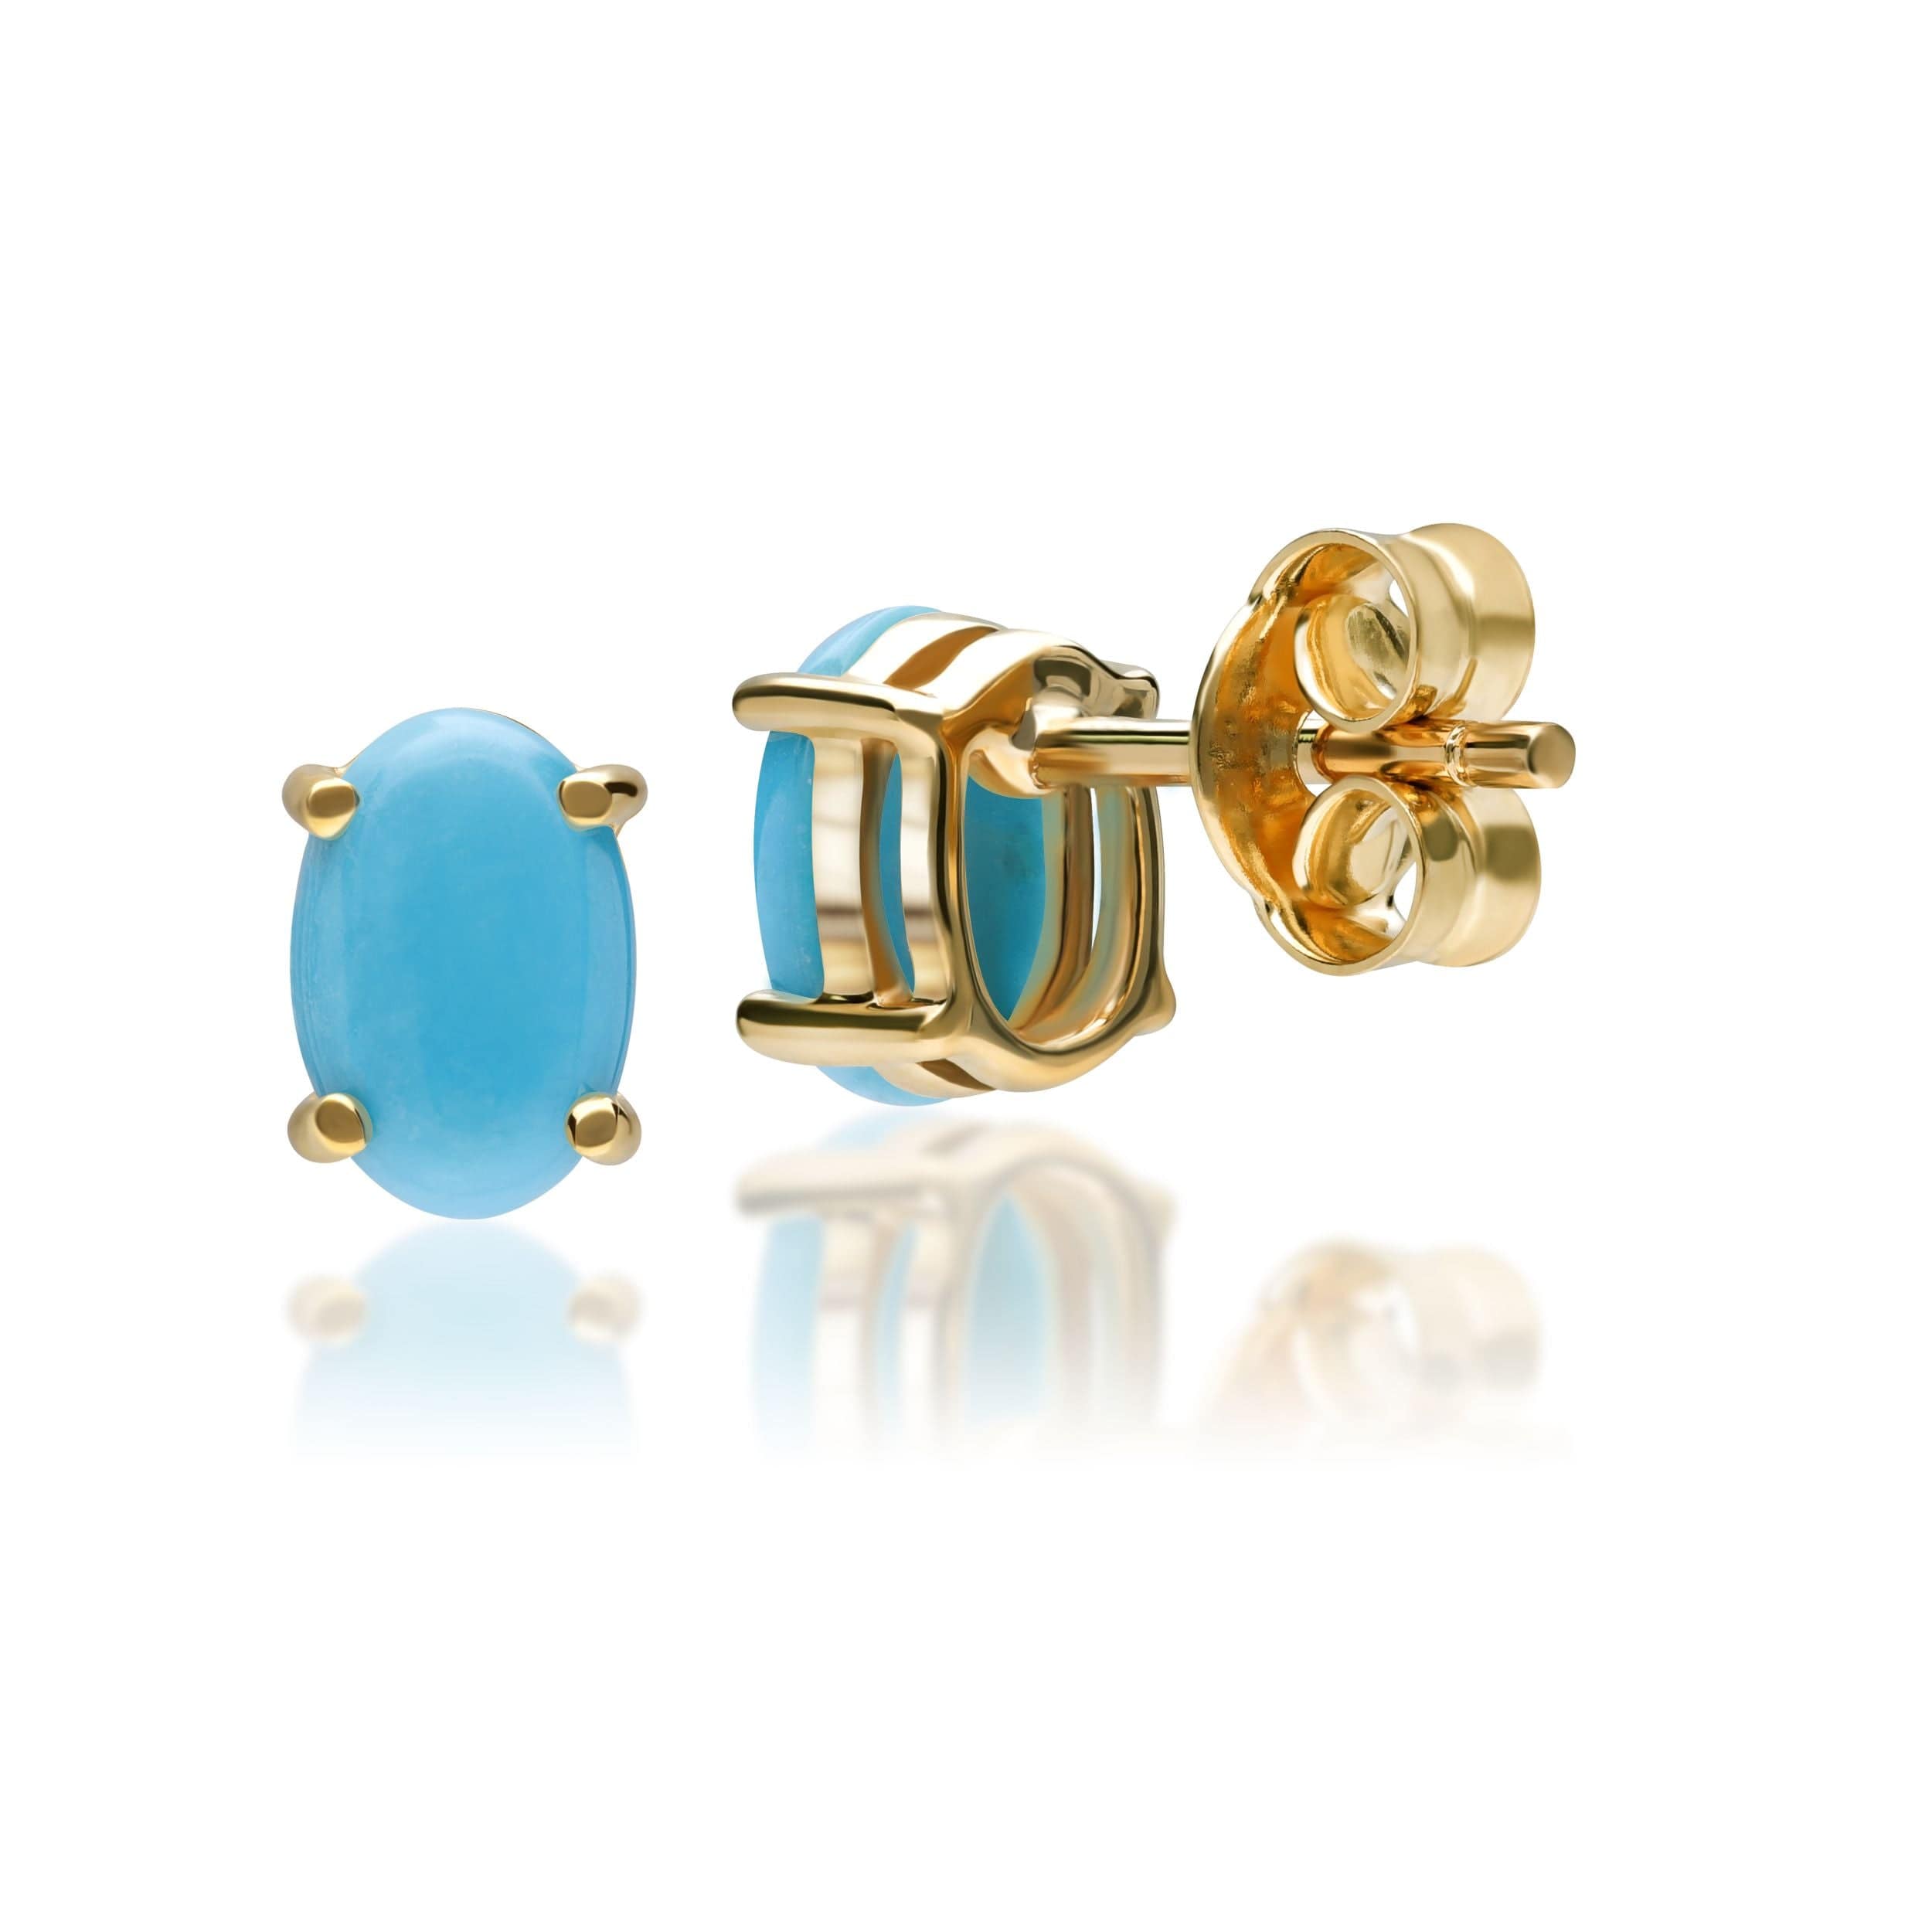 Classic Oval Turquoise Stud Earrings in 9ct Yellow Gold - Gemondo